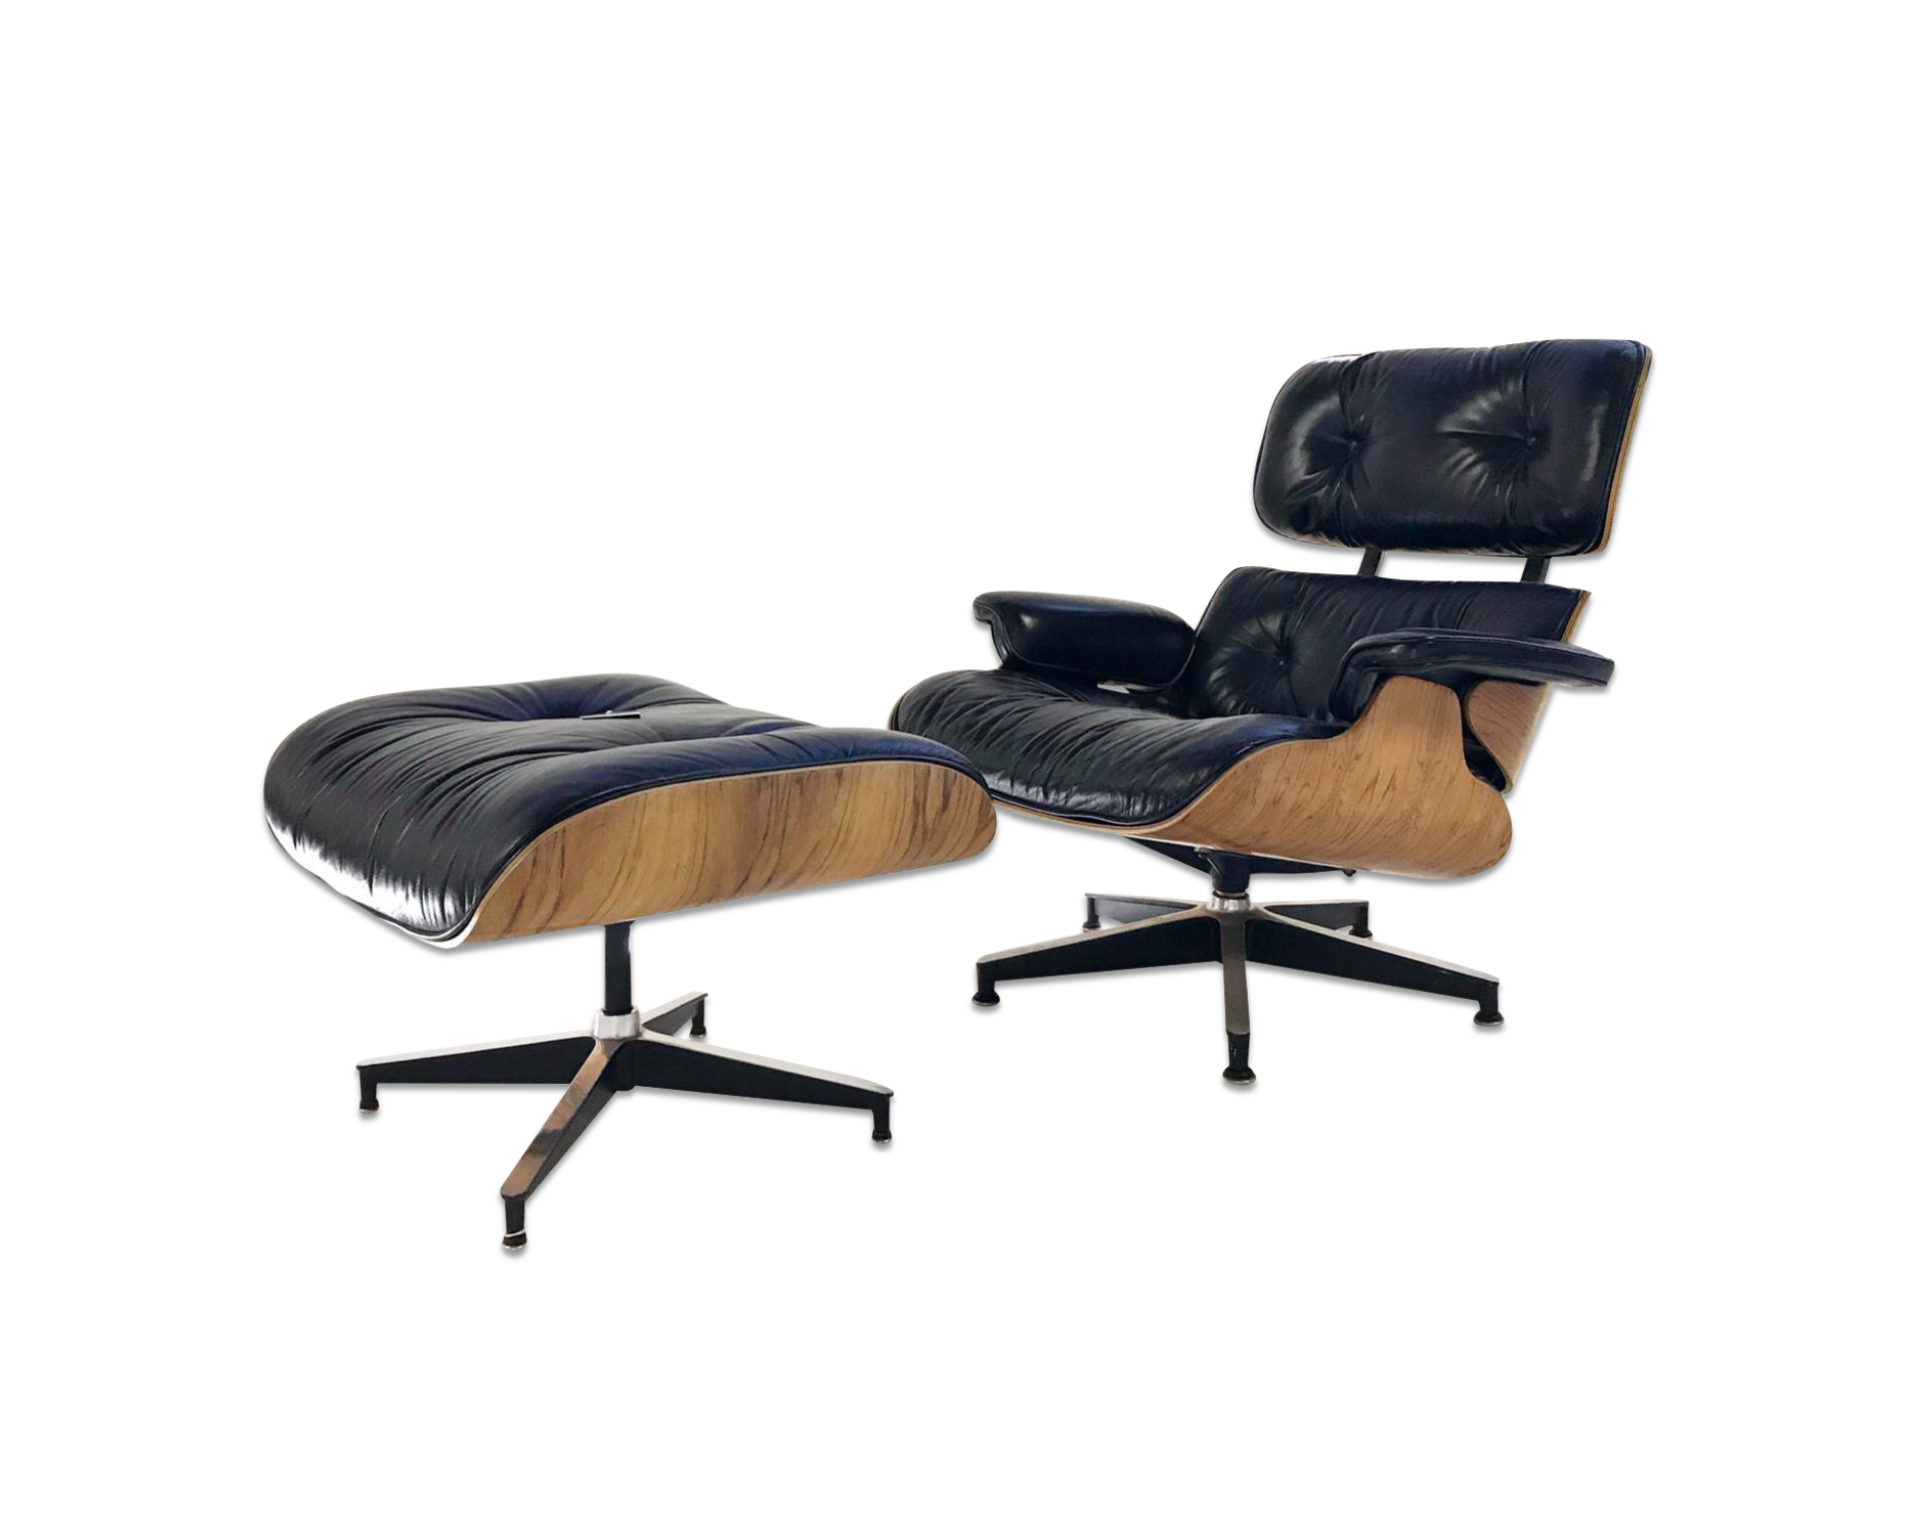 670 Lounge Chair and 671 Ottoman - FORSYTH